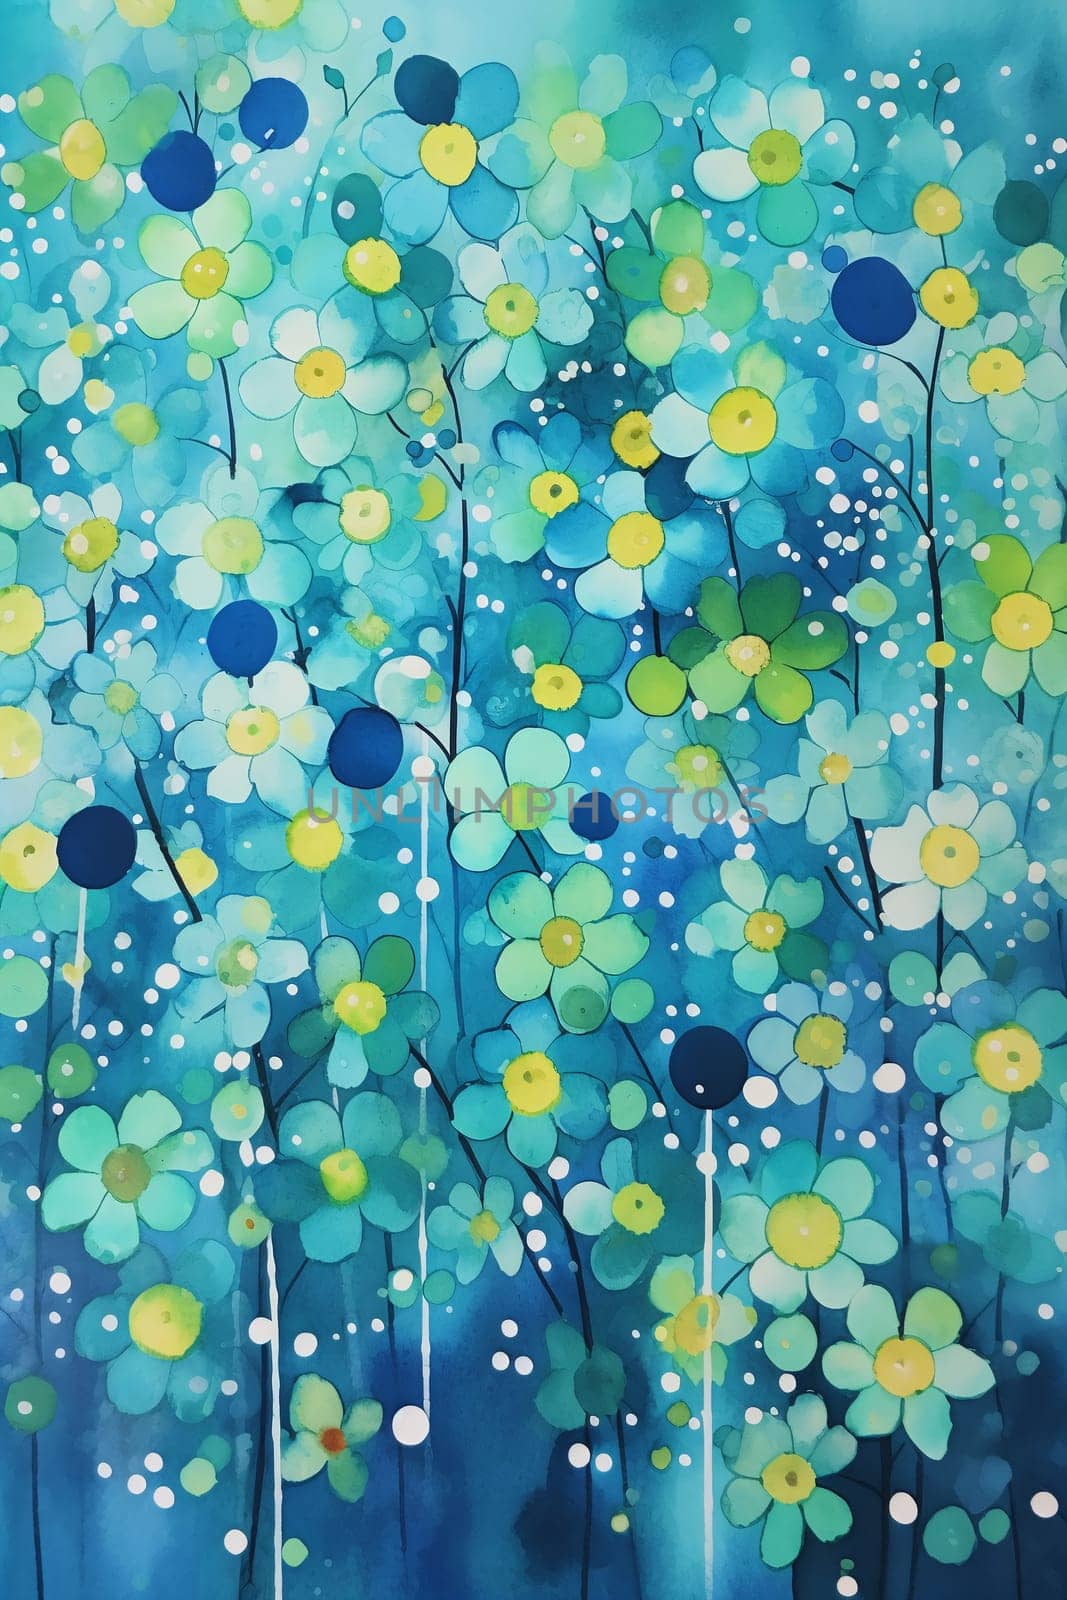 Abstract Floral Painting in Blue and Yellow Tones by chrisroll